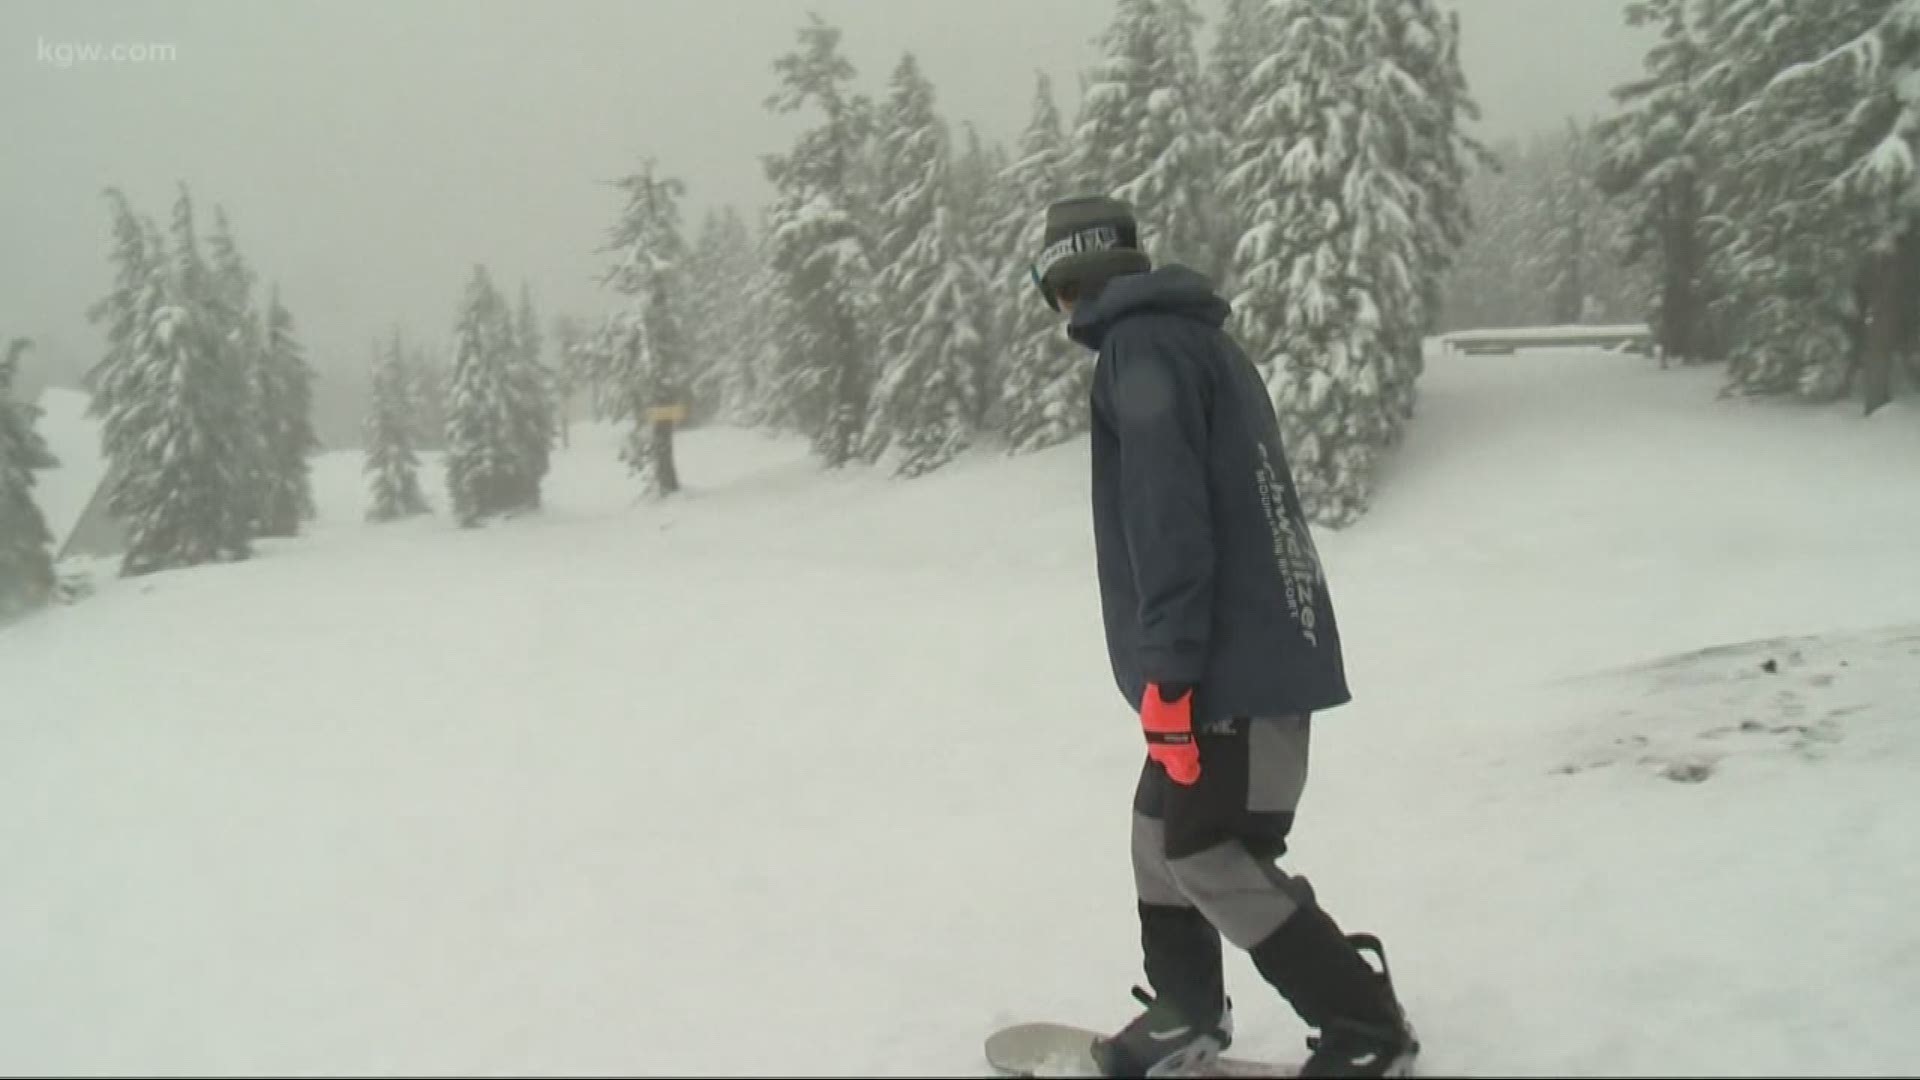 Sunday was a great day for skiers, snowboarders, and snow lovers. With enough snow on Mt. Hood, Timberline opened for one “preview day,” and people flocked to the mo